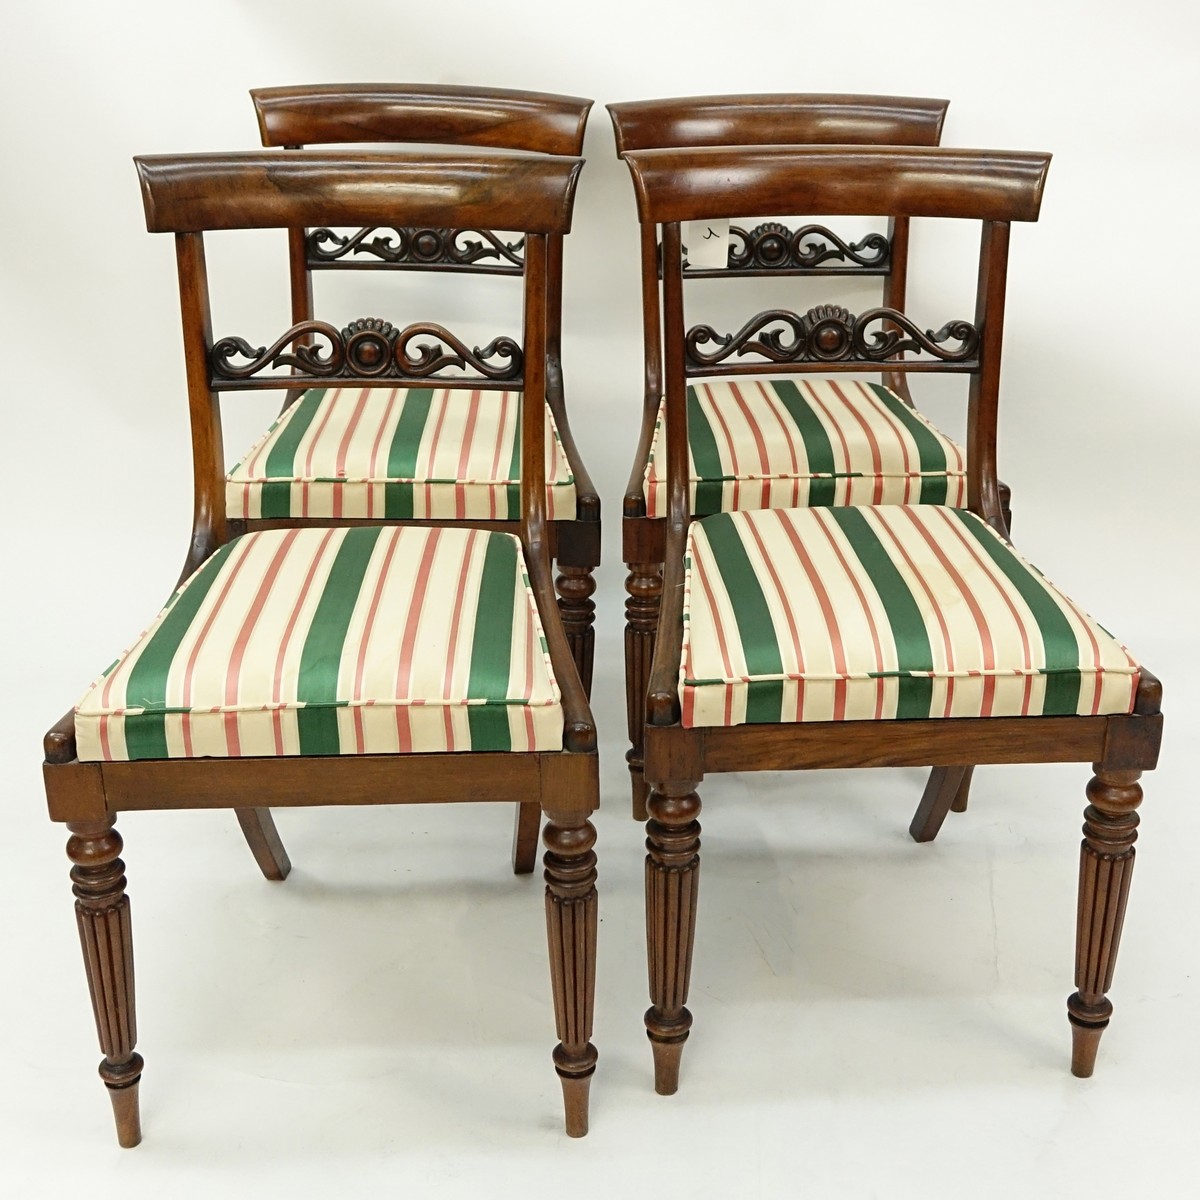 Set of Four (4) Antique English Regency style Carved Mahogany and Upholstered Side Chairs. Pierced splats and stands on tapered legs with molded front legs.